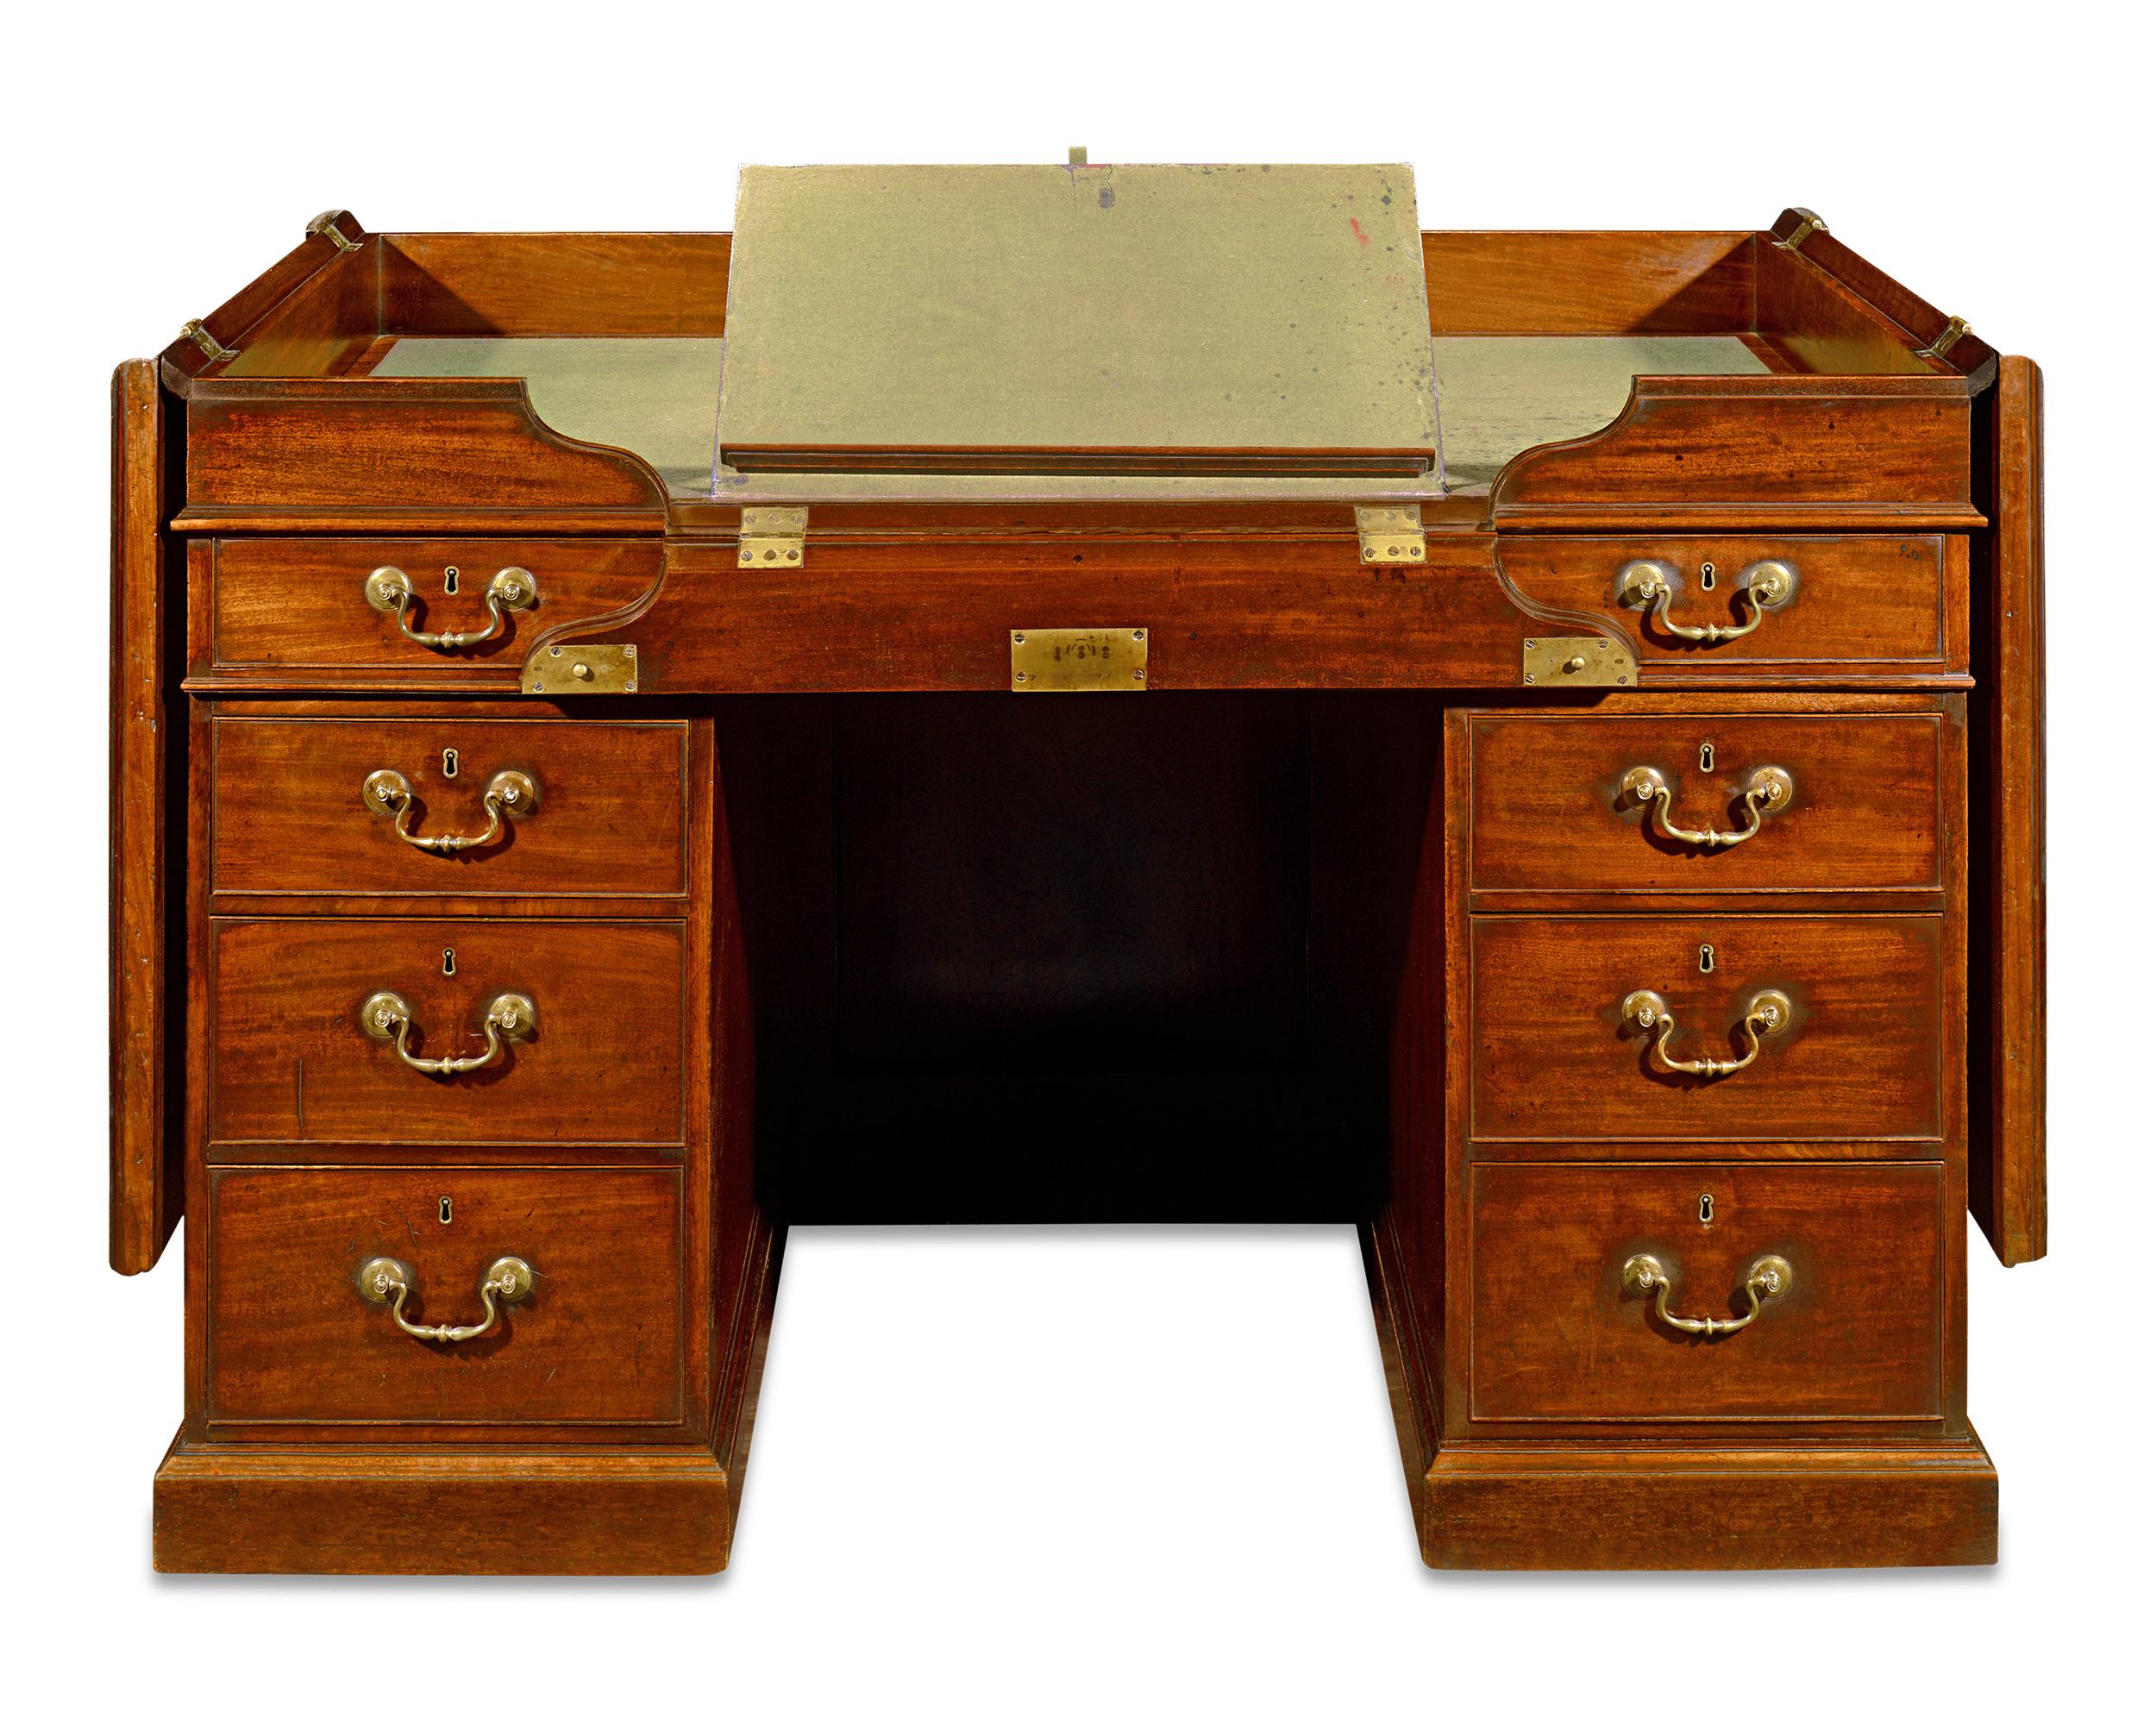 Brass Mahogany Desk by Thomas Chippendale